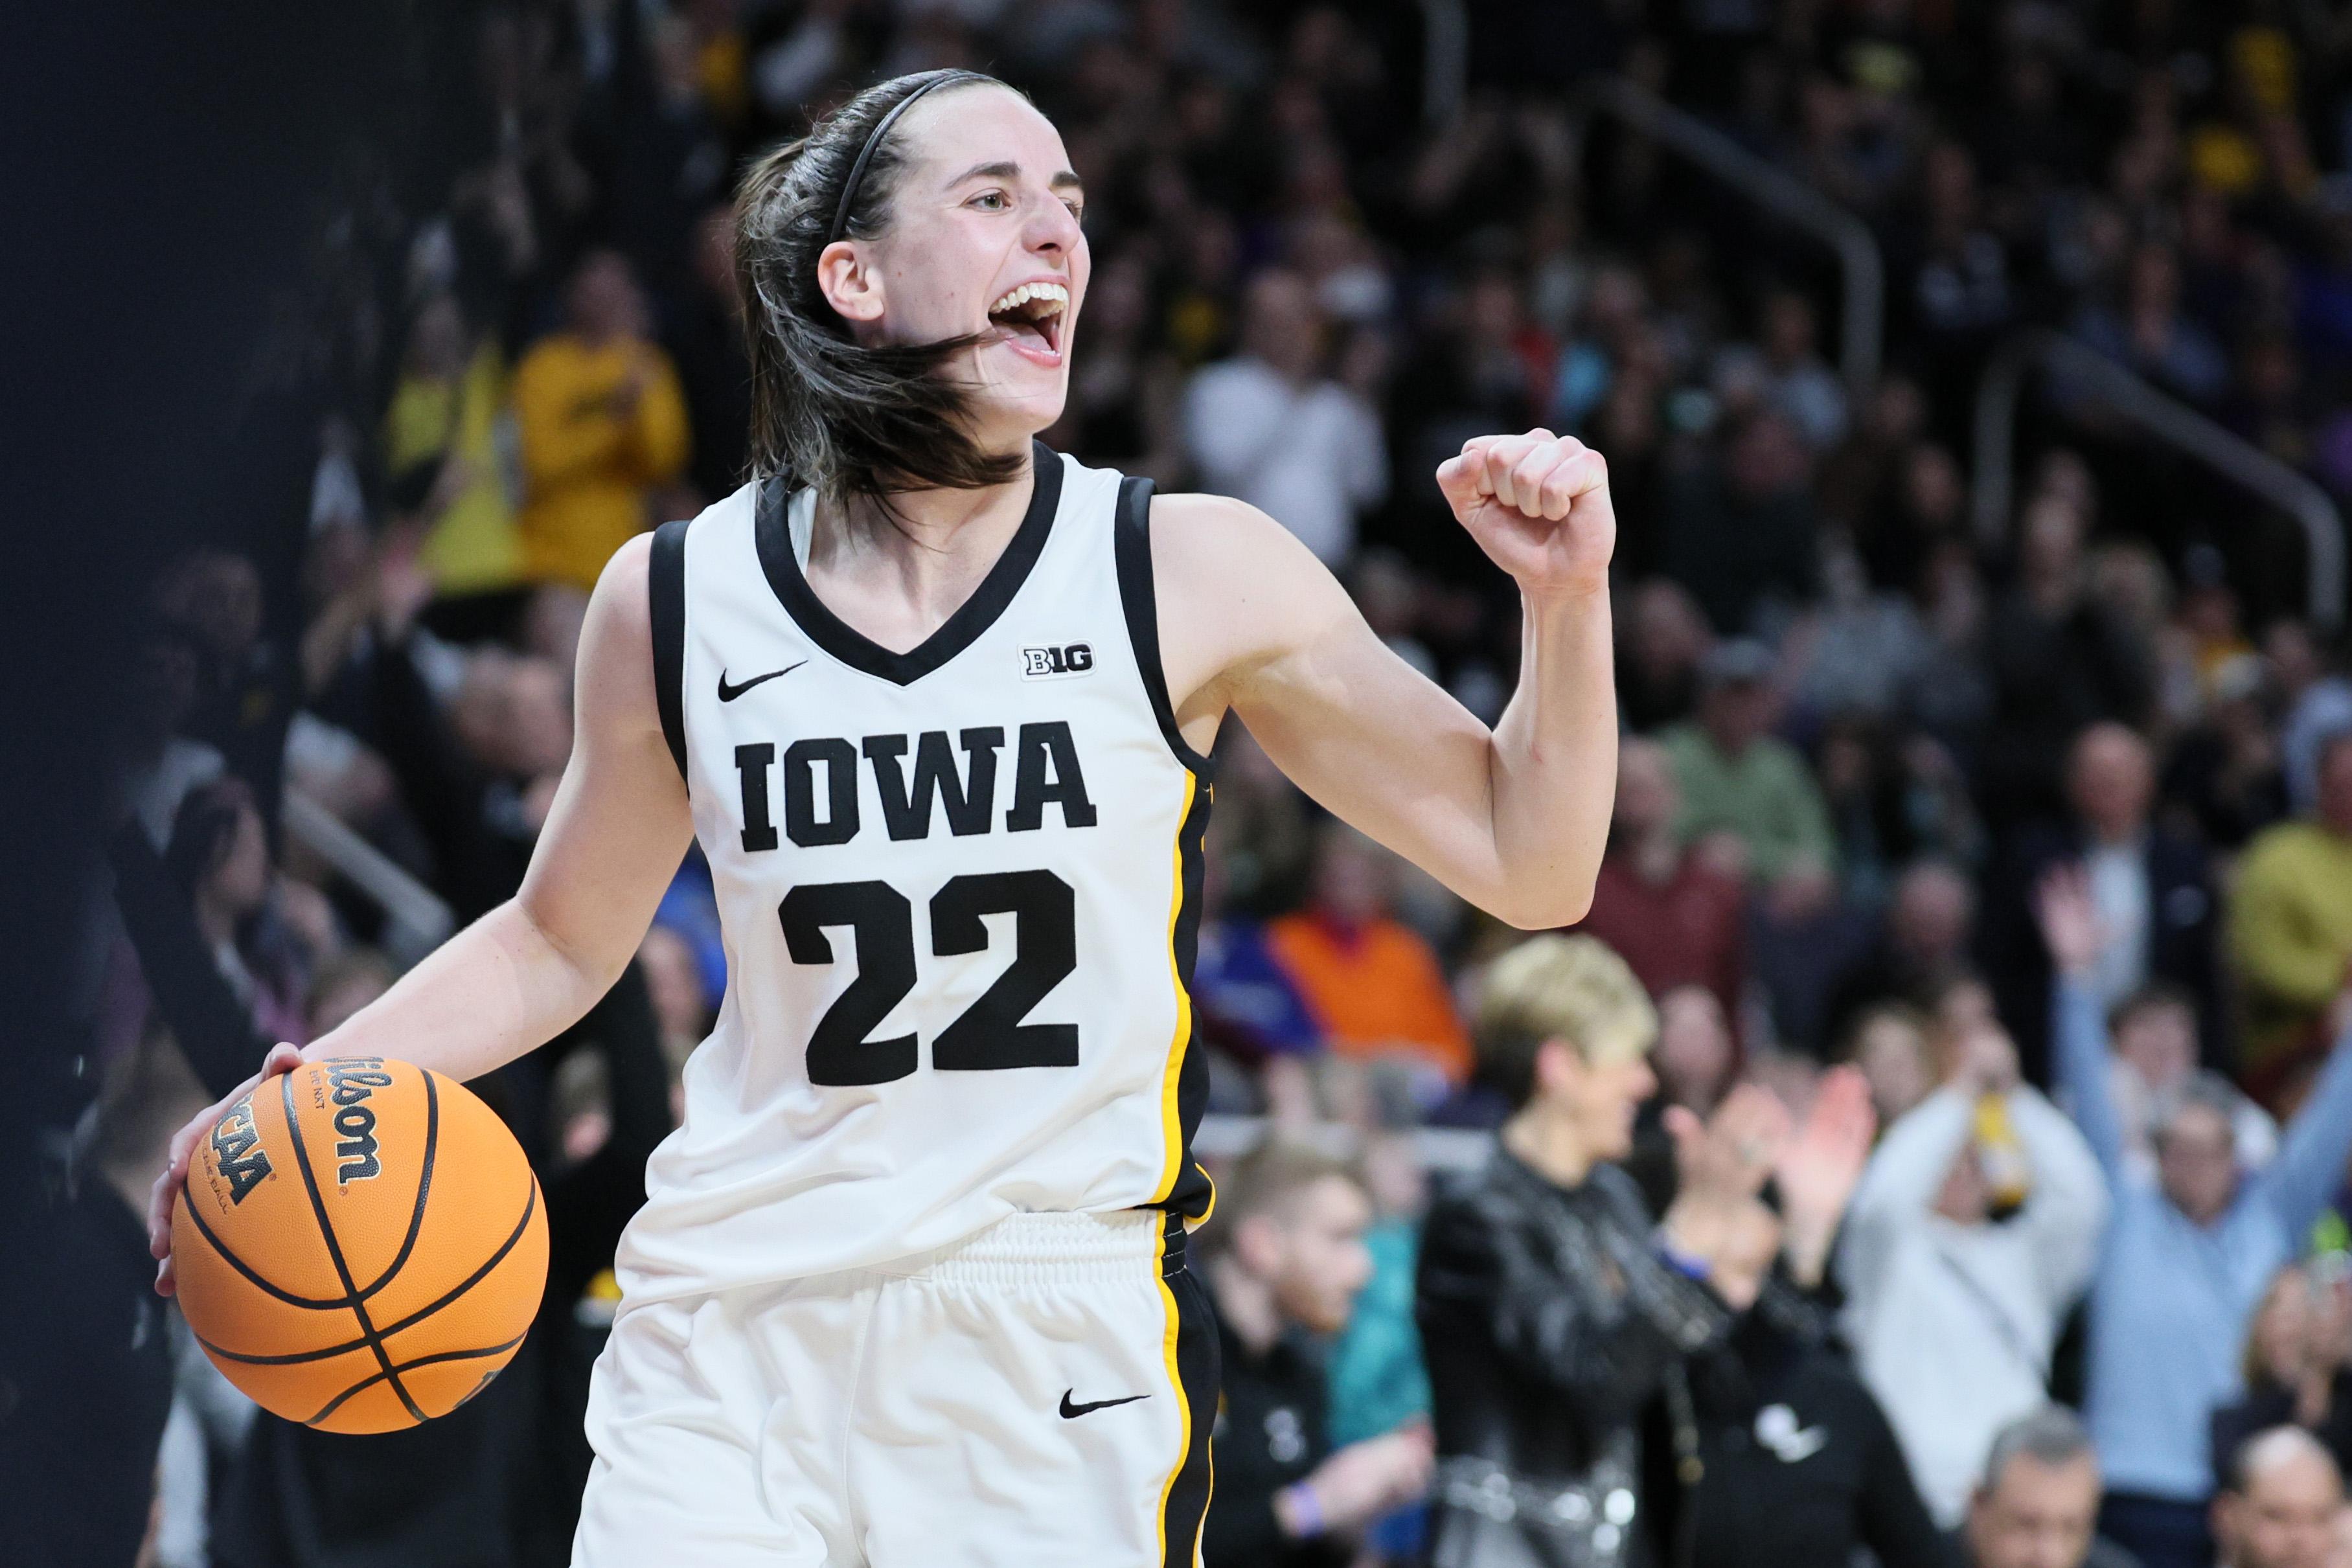 College Basketball’s Greatest Player Just Showed Why America Is Hooked on Her Alex Kirshner